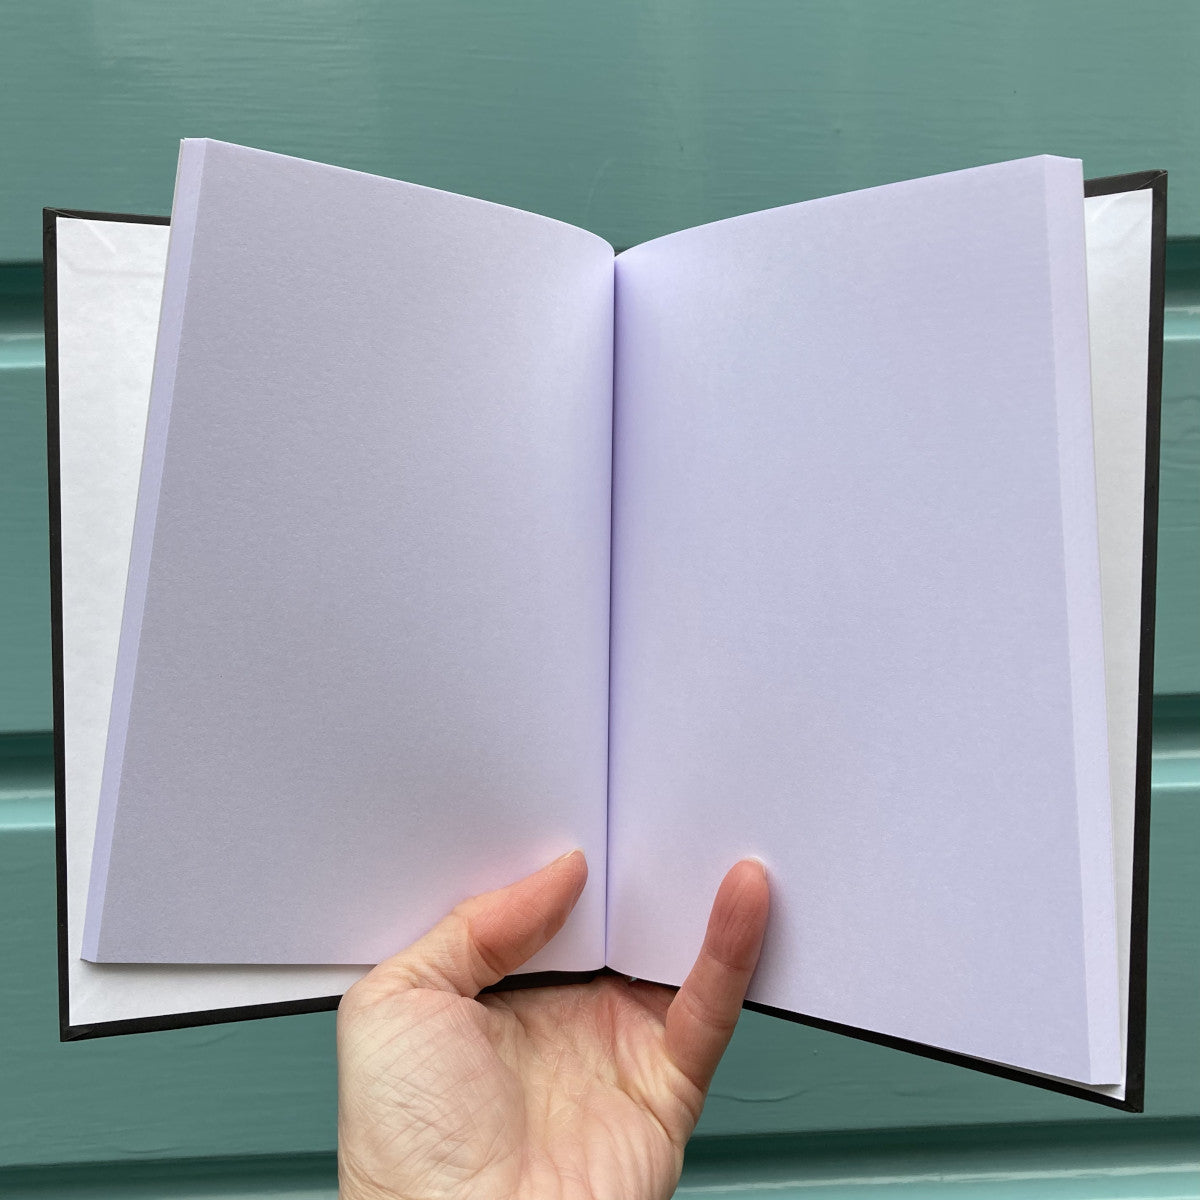 Hardback journal held open in a hand showing plain white pages within